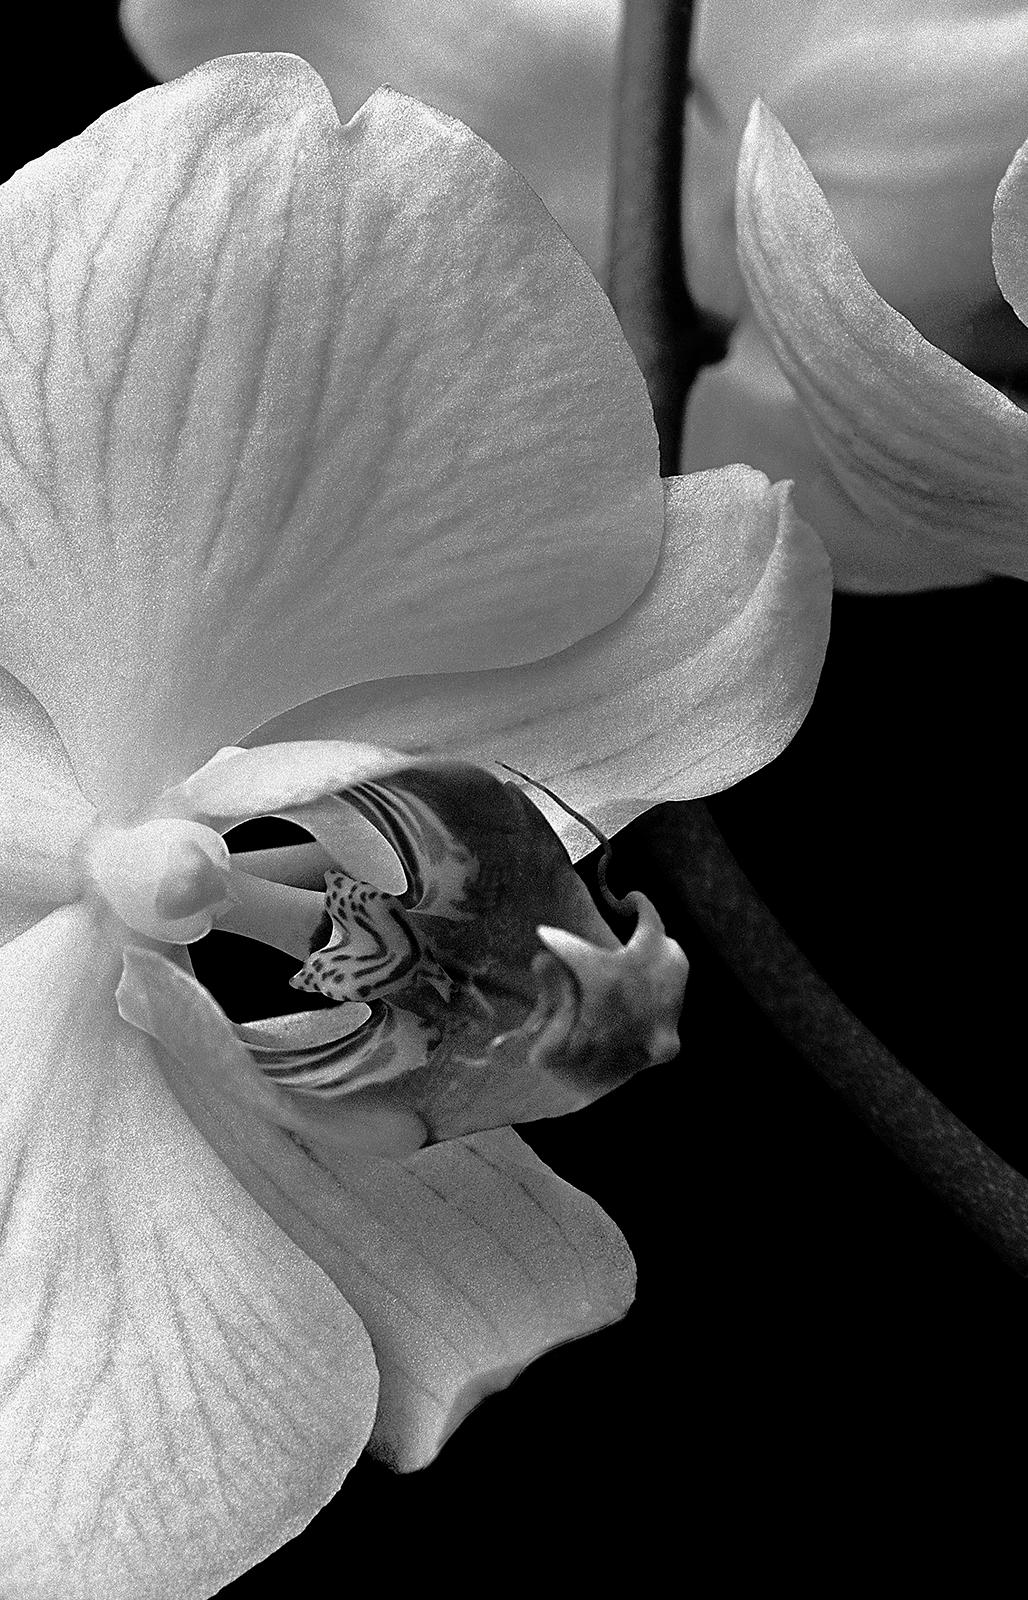 Orchid-Signed limited edition still life print, Black white nature, Romantic - Photograph by Ian Sanderson